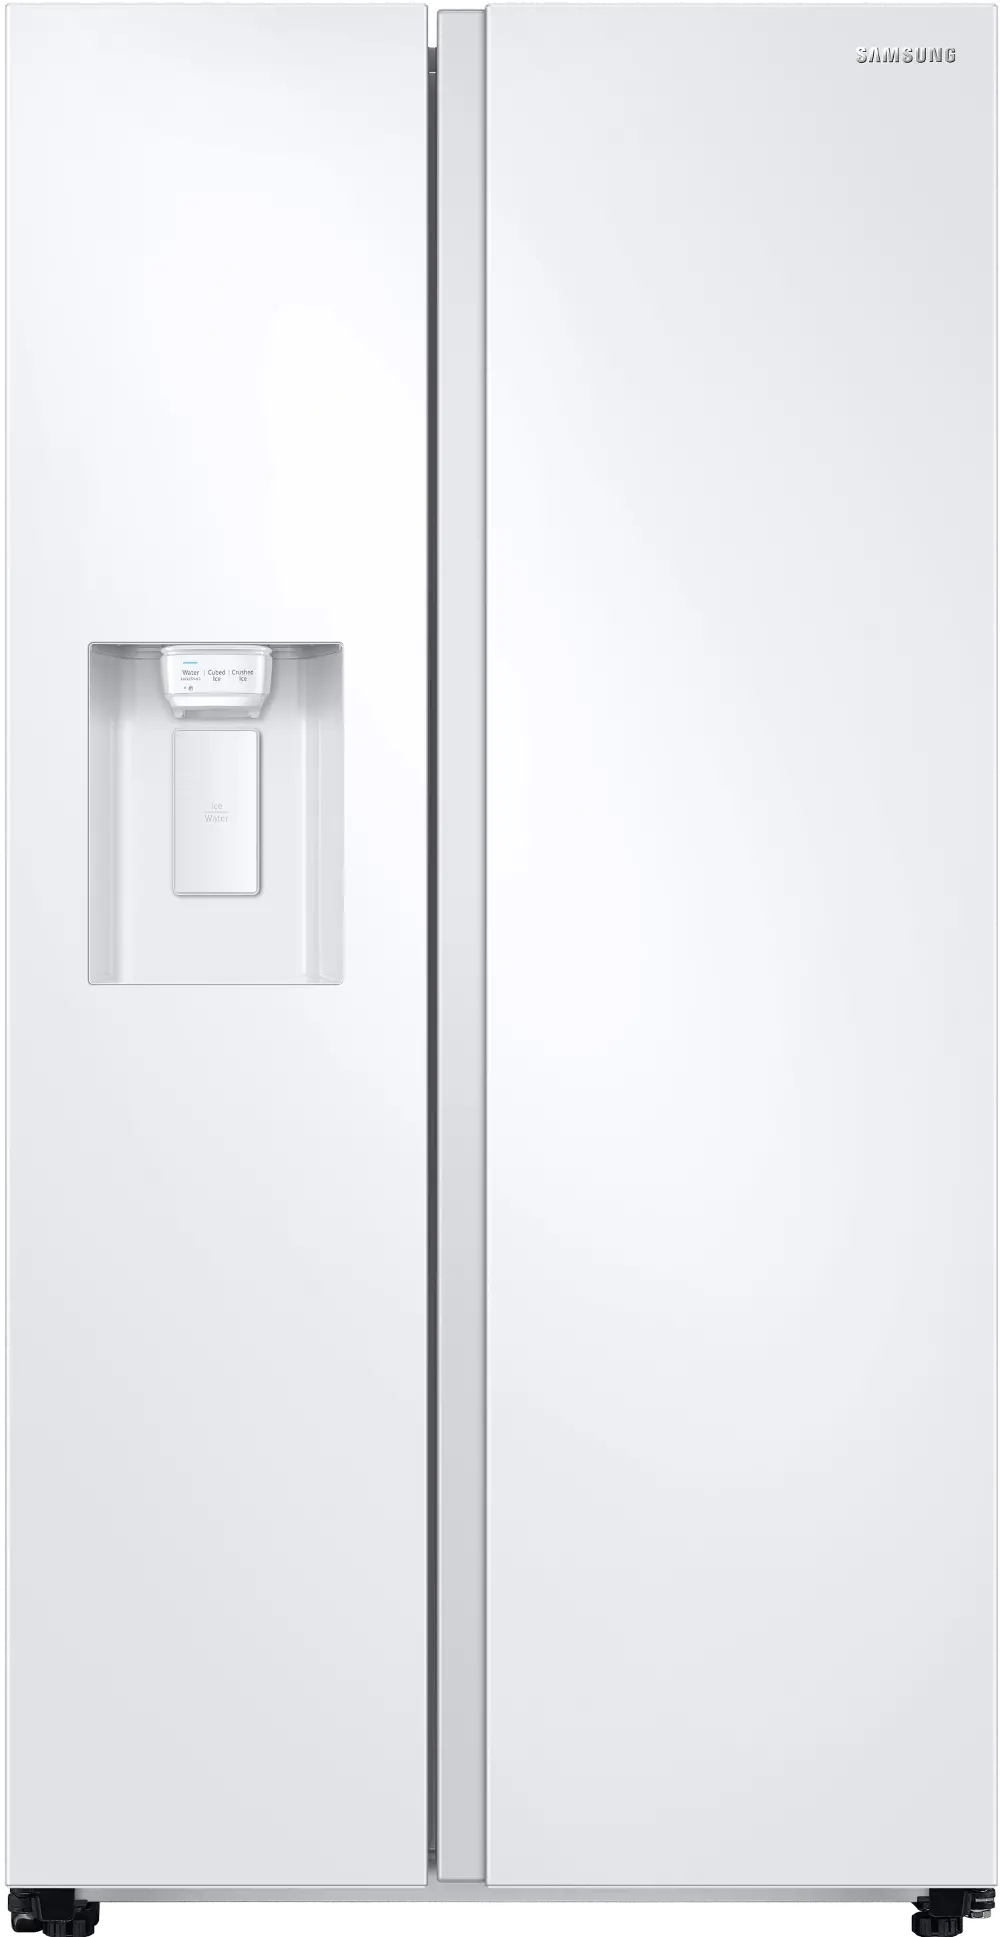 RS27T5200WW Samsung 27.4 cu ft Side by Side Refrigerator - White-1